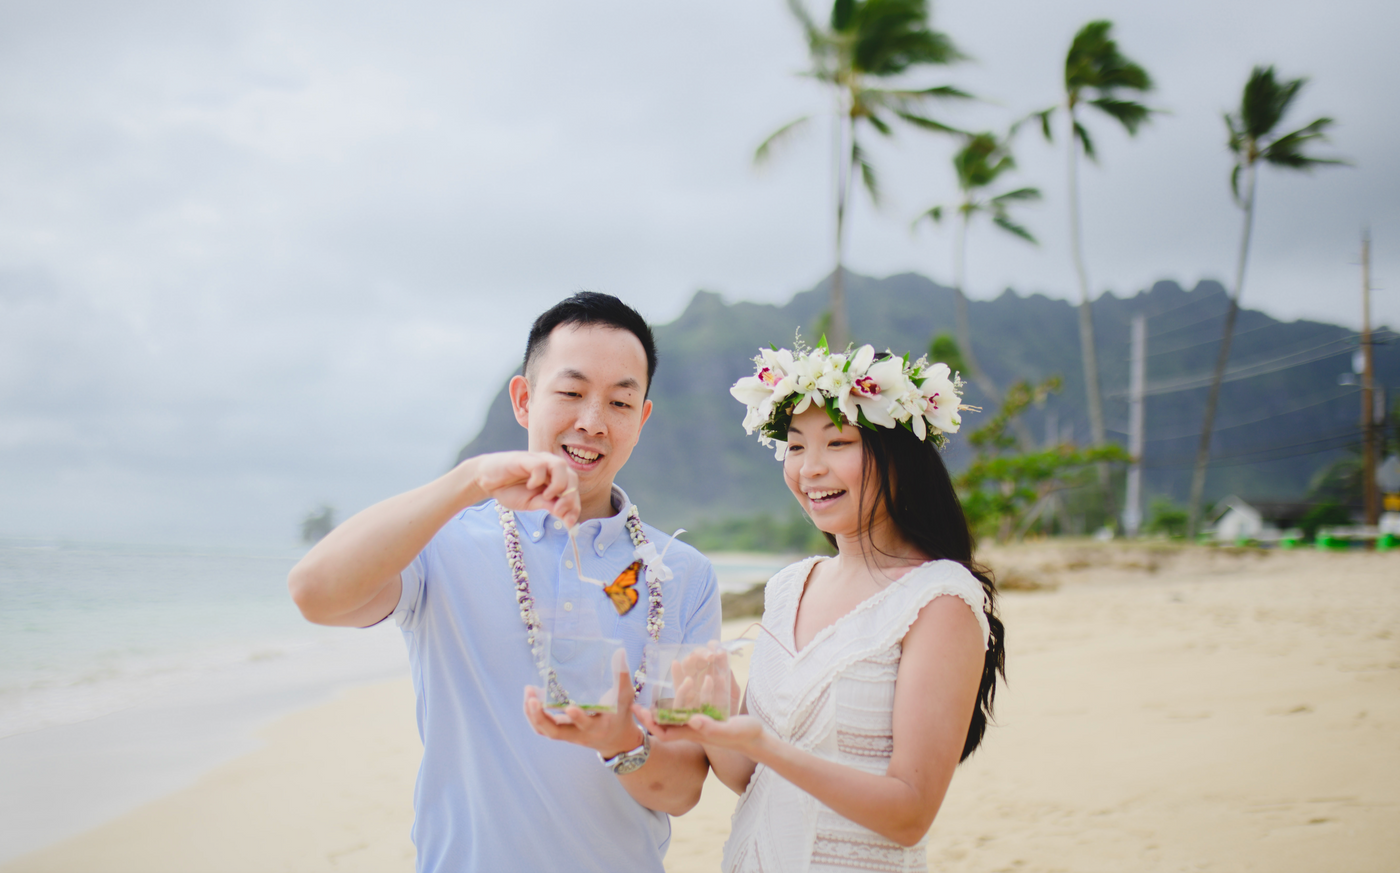 Beautiful asian couple releasing monarch butterfly on Oahu in Hawaii by Kualoa Ranch in celebration of expecting baby for baby moon. Butterfly was emerge or eclose from chrysalis box before releasing. 